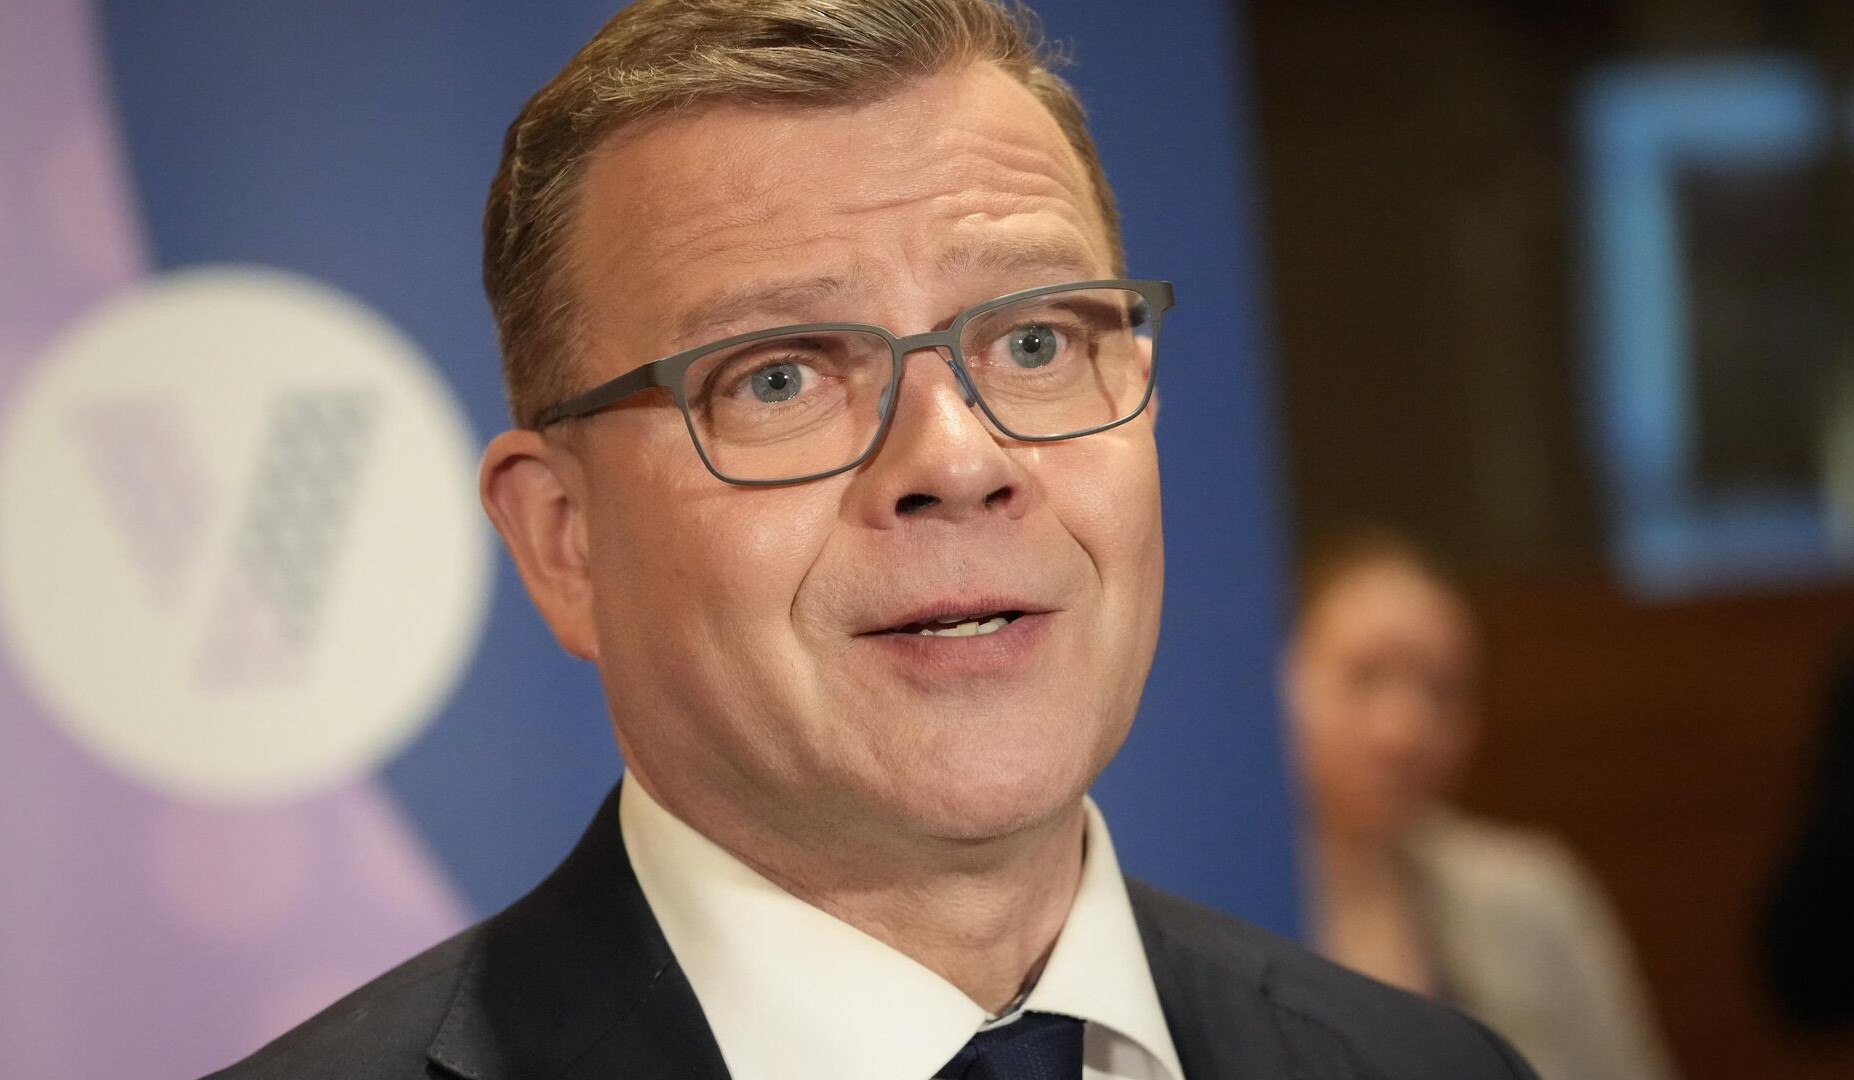 Finland will not hold political discussions with Russia over situation on eastern border: Orpo